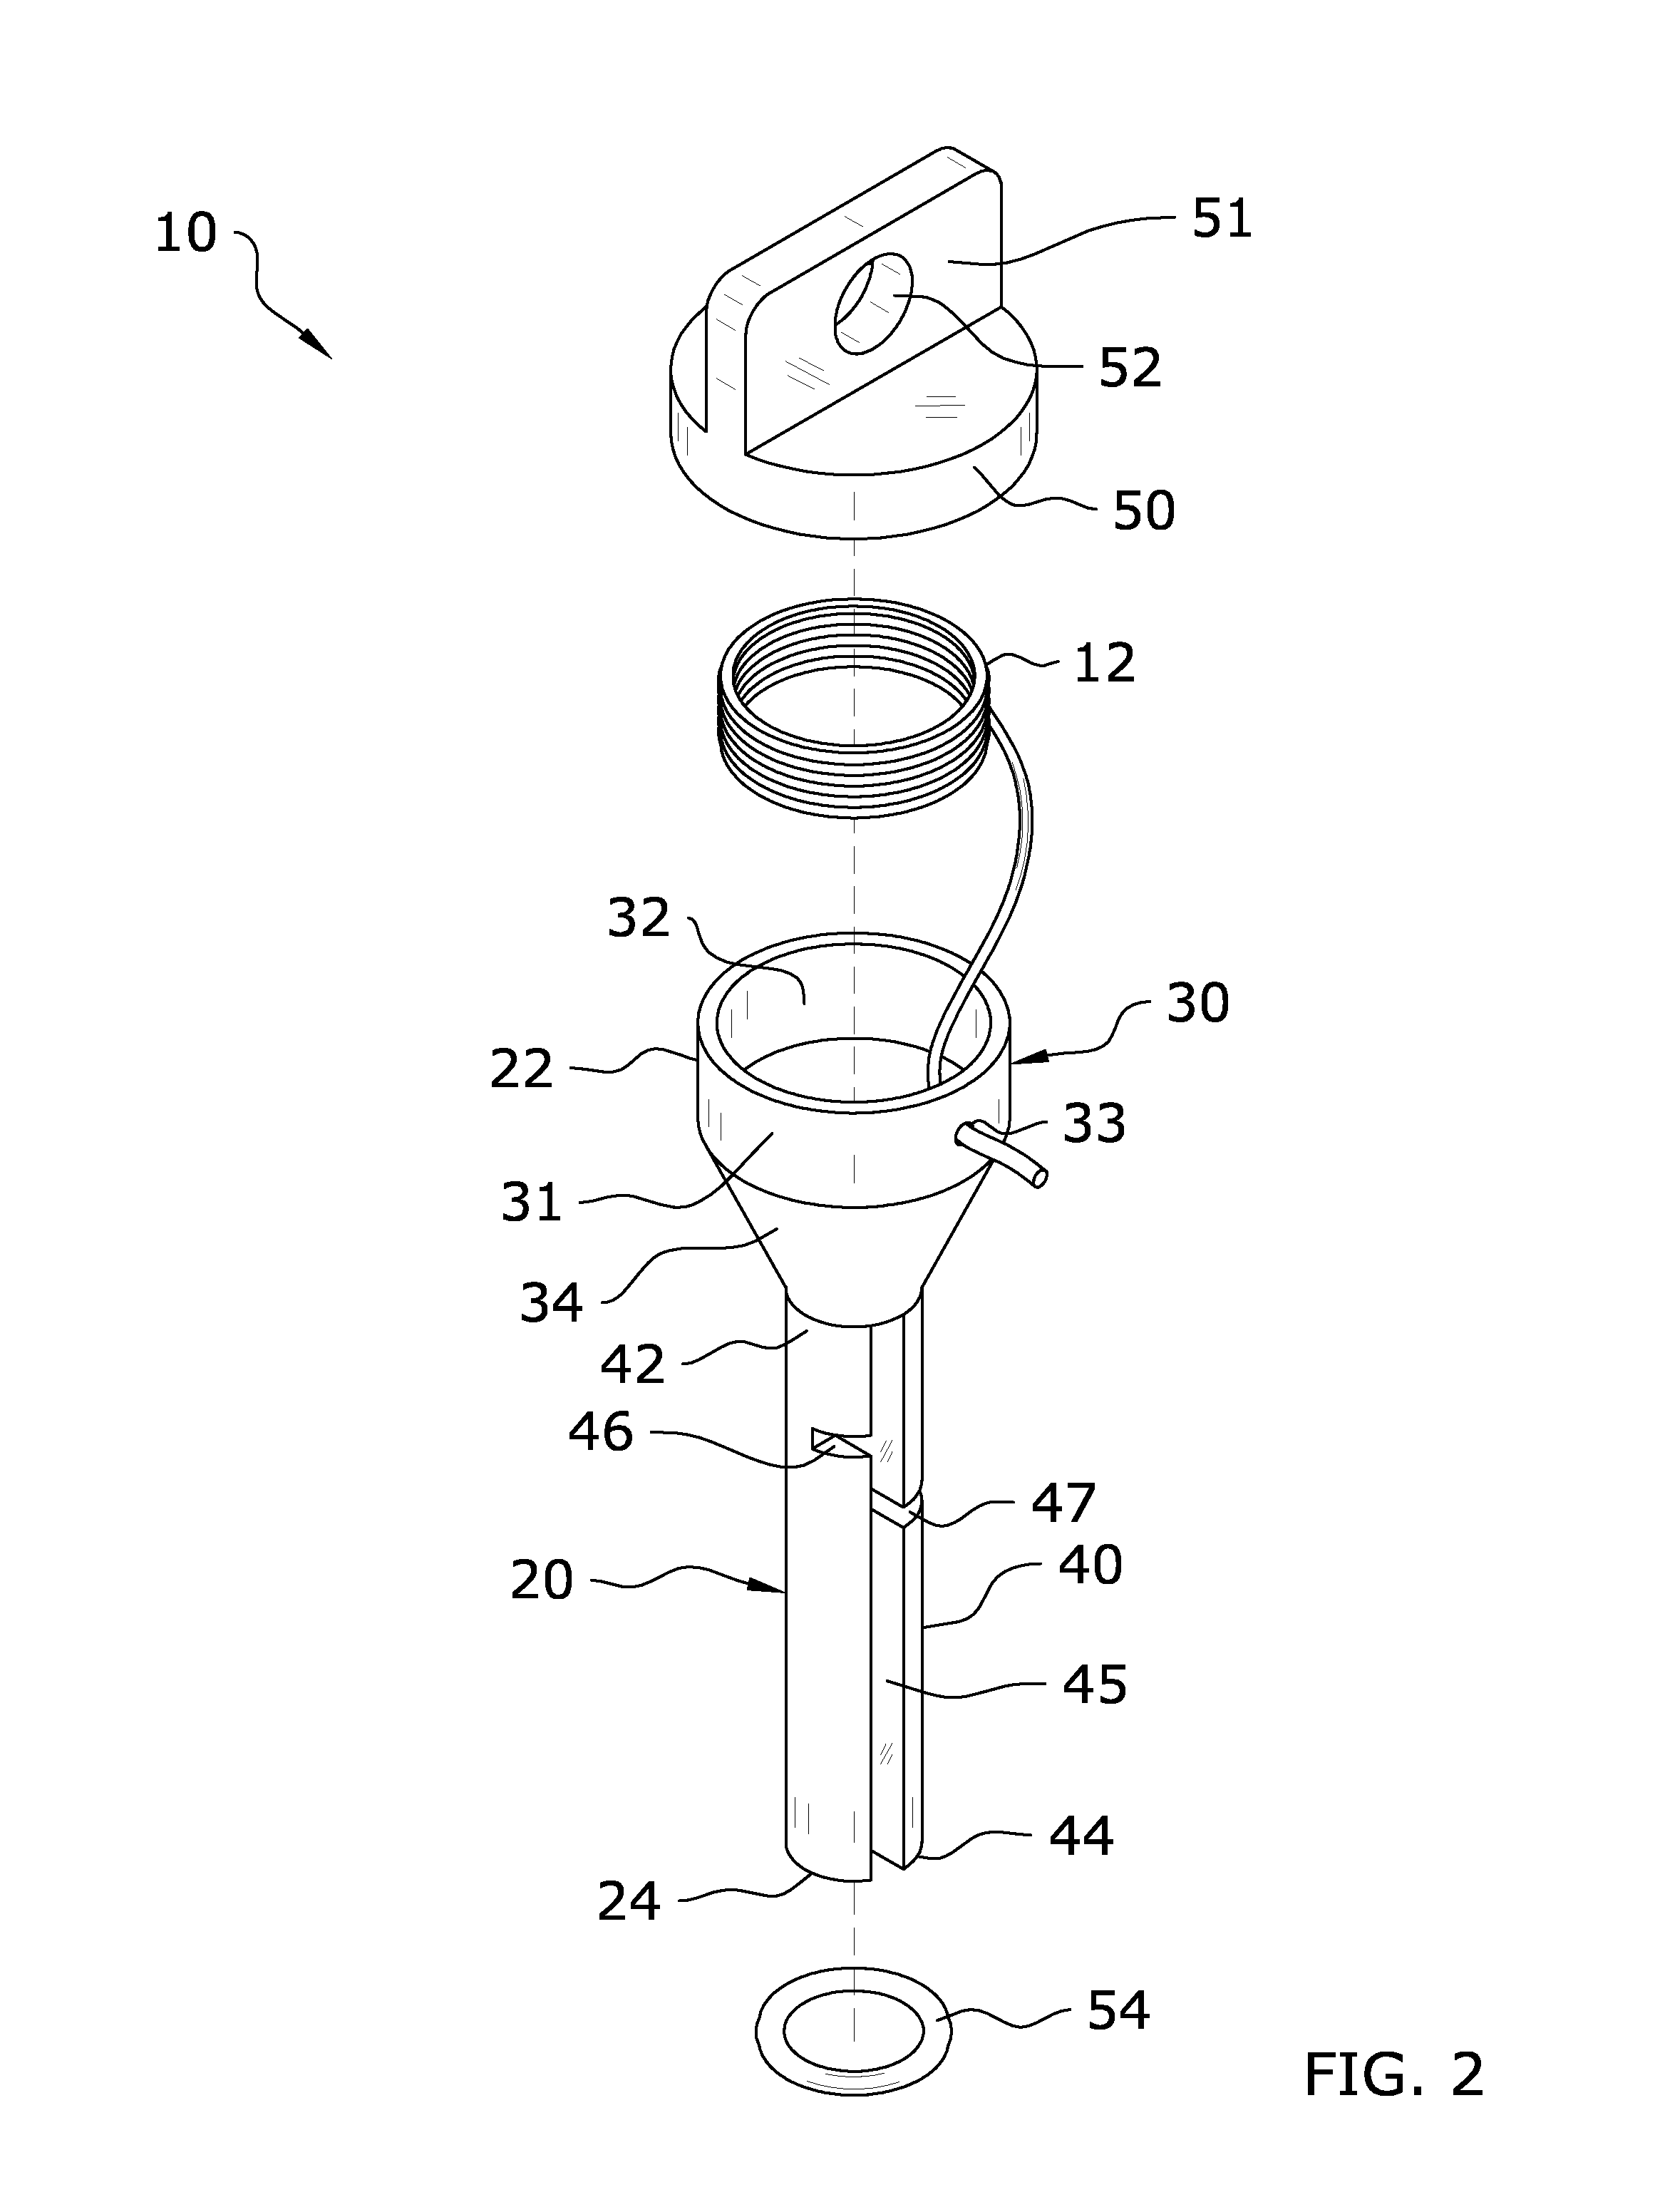 Stop knot tying device